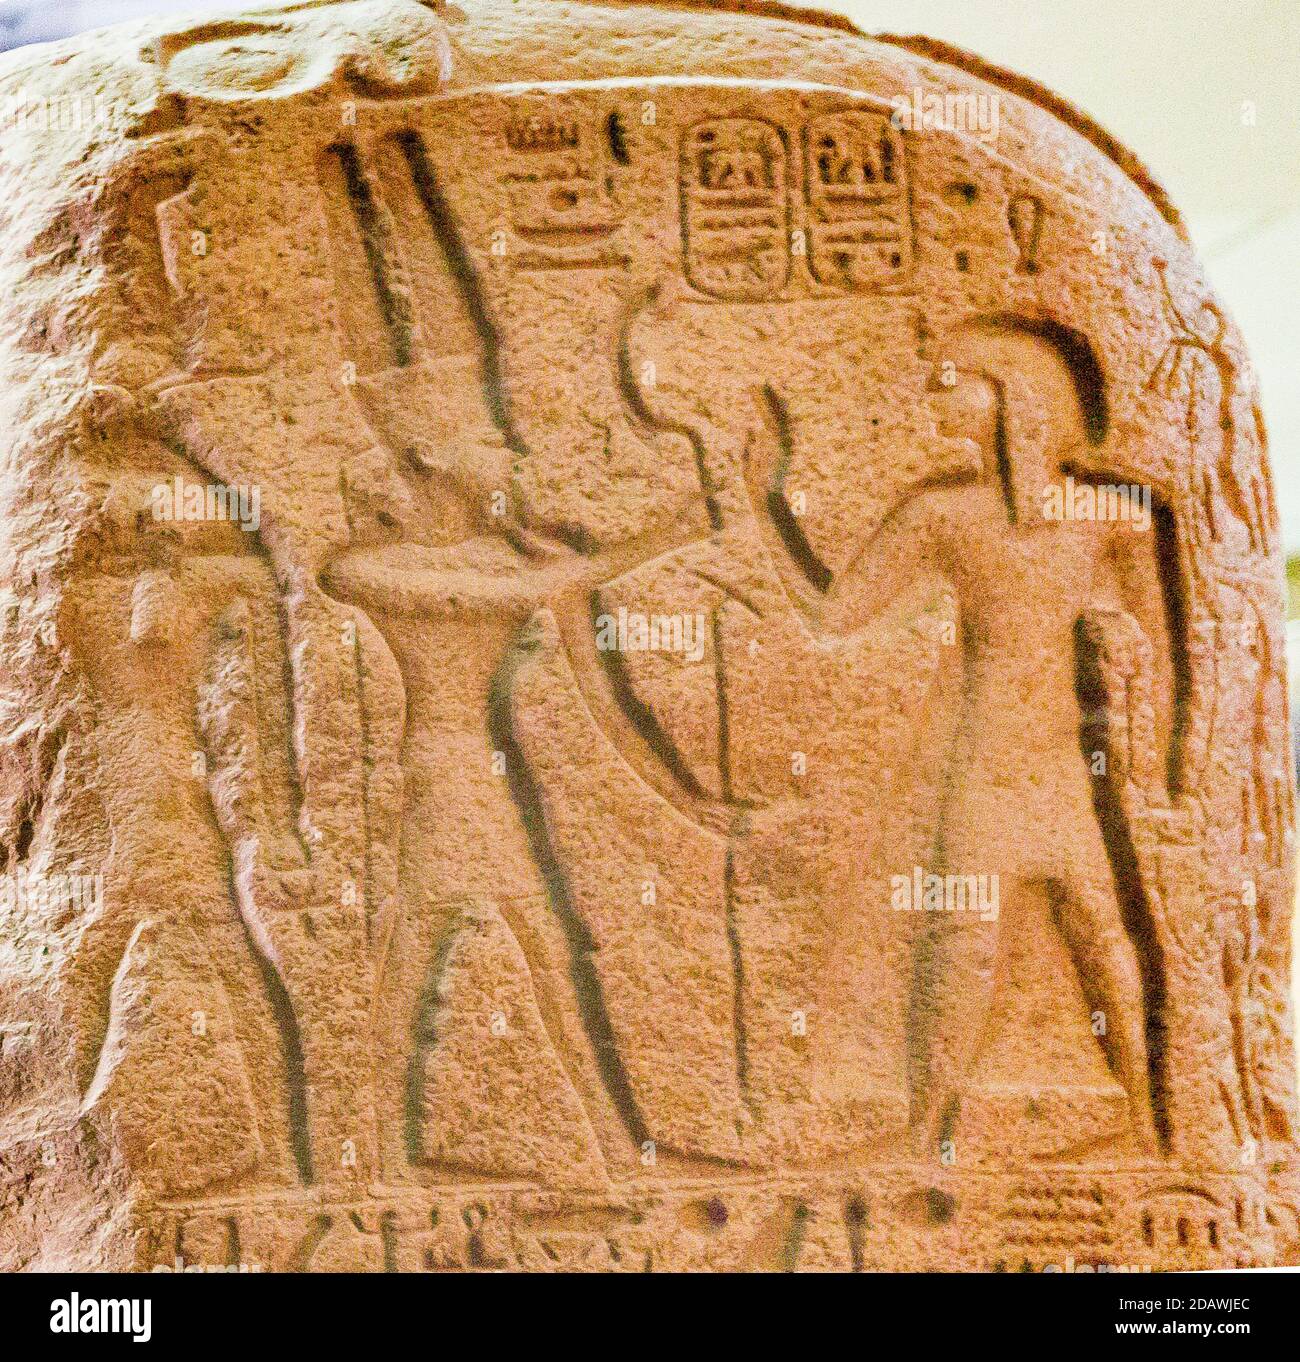 Egypt, Cairo, Egyptian Museum, stele of Merenptah commemorating his campaign against the Libyan, year 5 of his reign. Granite, from Kom el Ahmar. Stock Photo